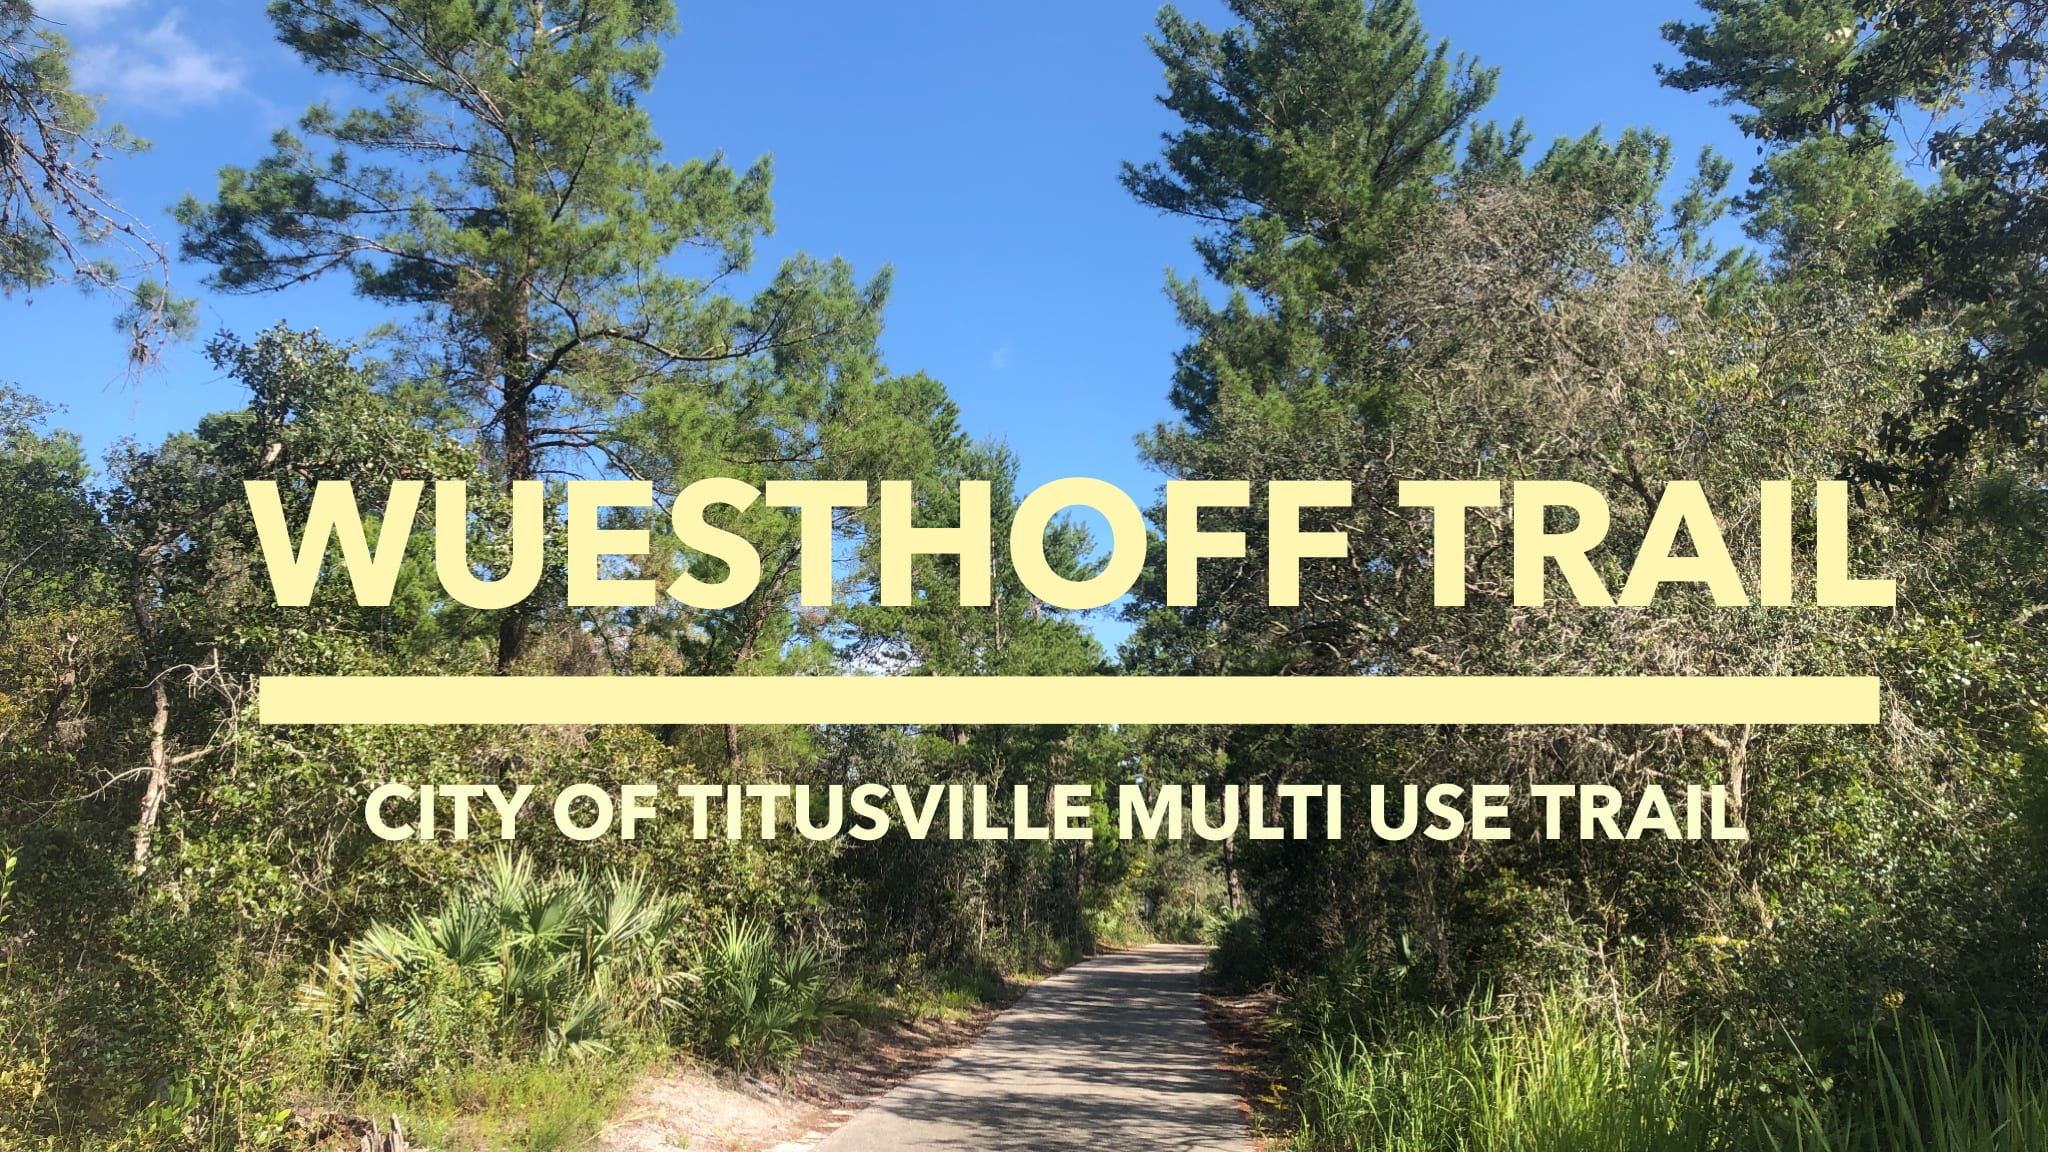 City of Titusville, Florida - Gateway to Nature and Space